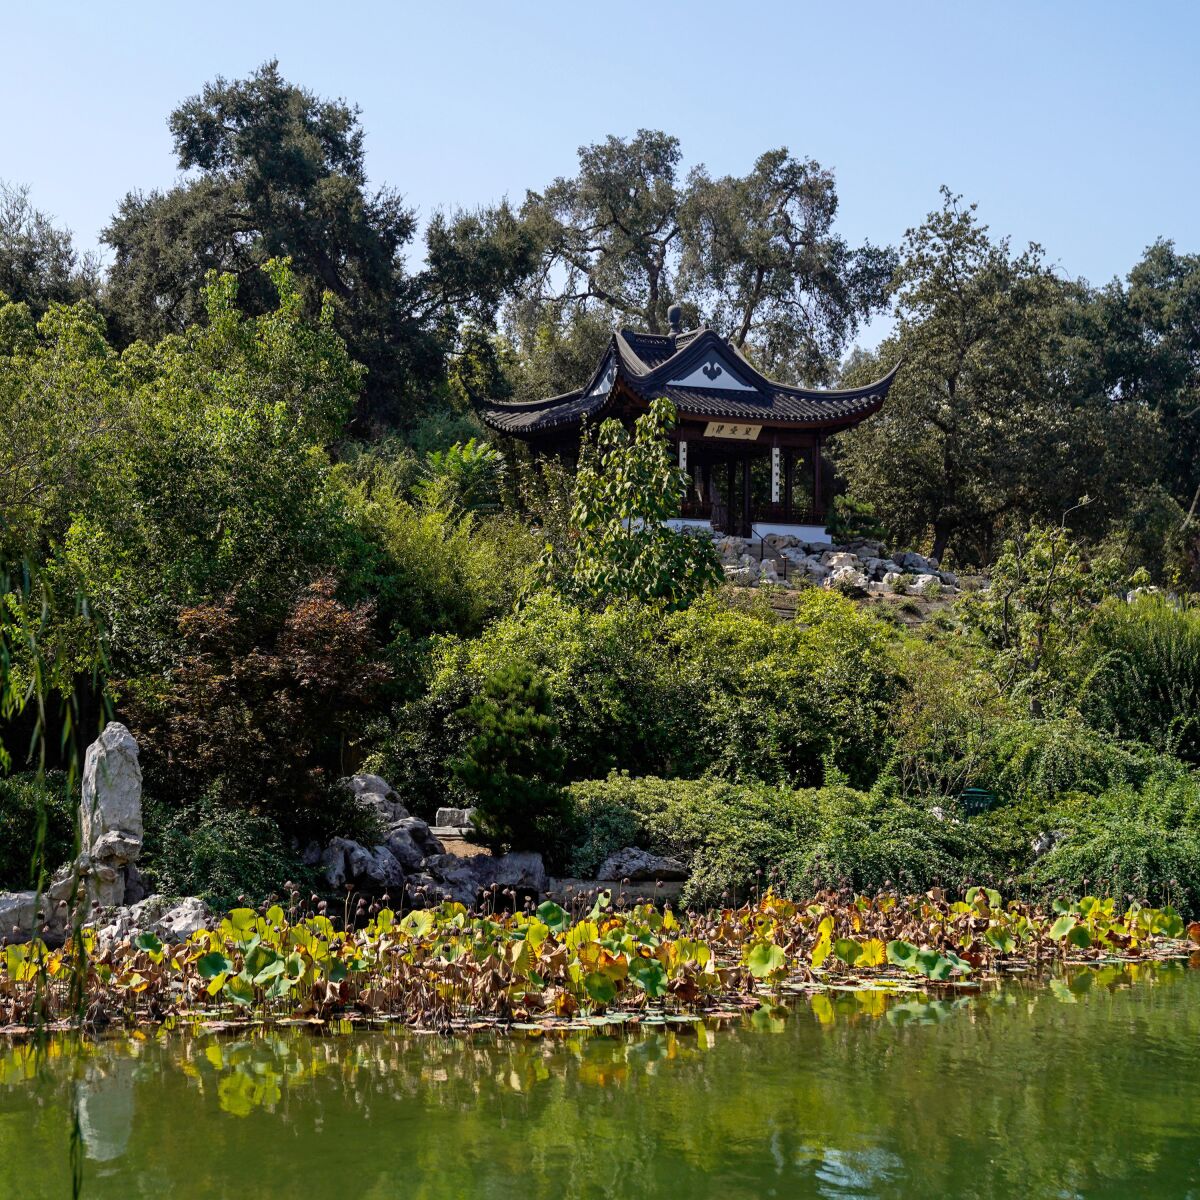 A Chinese pavilion and lily pond.